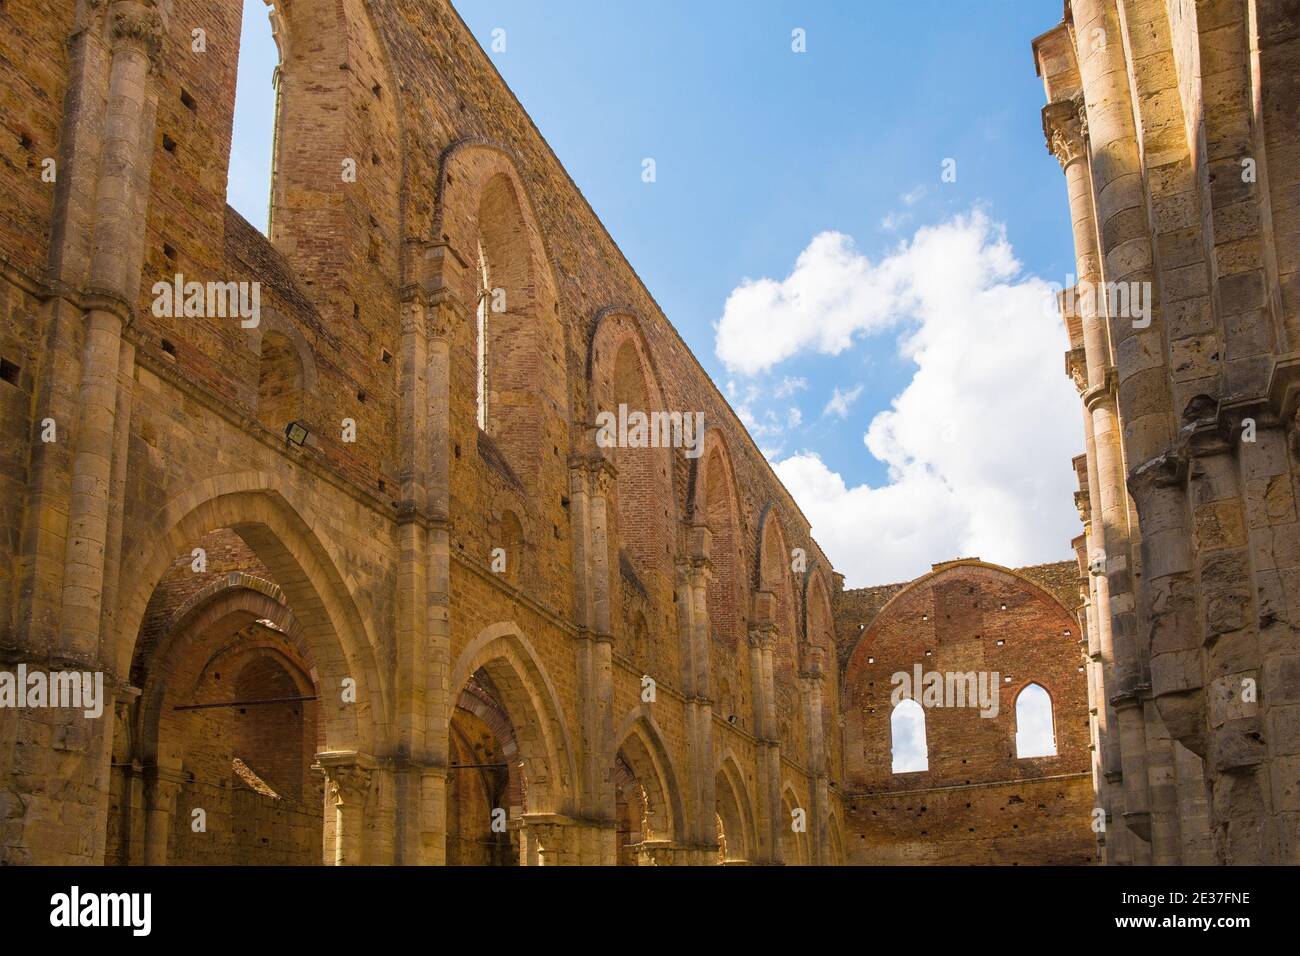 Chiusdino,Italy-7th Sept 2020.The roofless San Galgano Abbey ,Siena Province,Tuscany. Arch/radius windows at the top, lancet/pointed arches at bottom Stock Photo